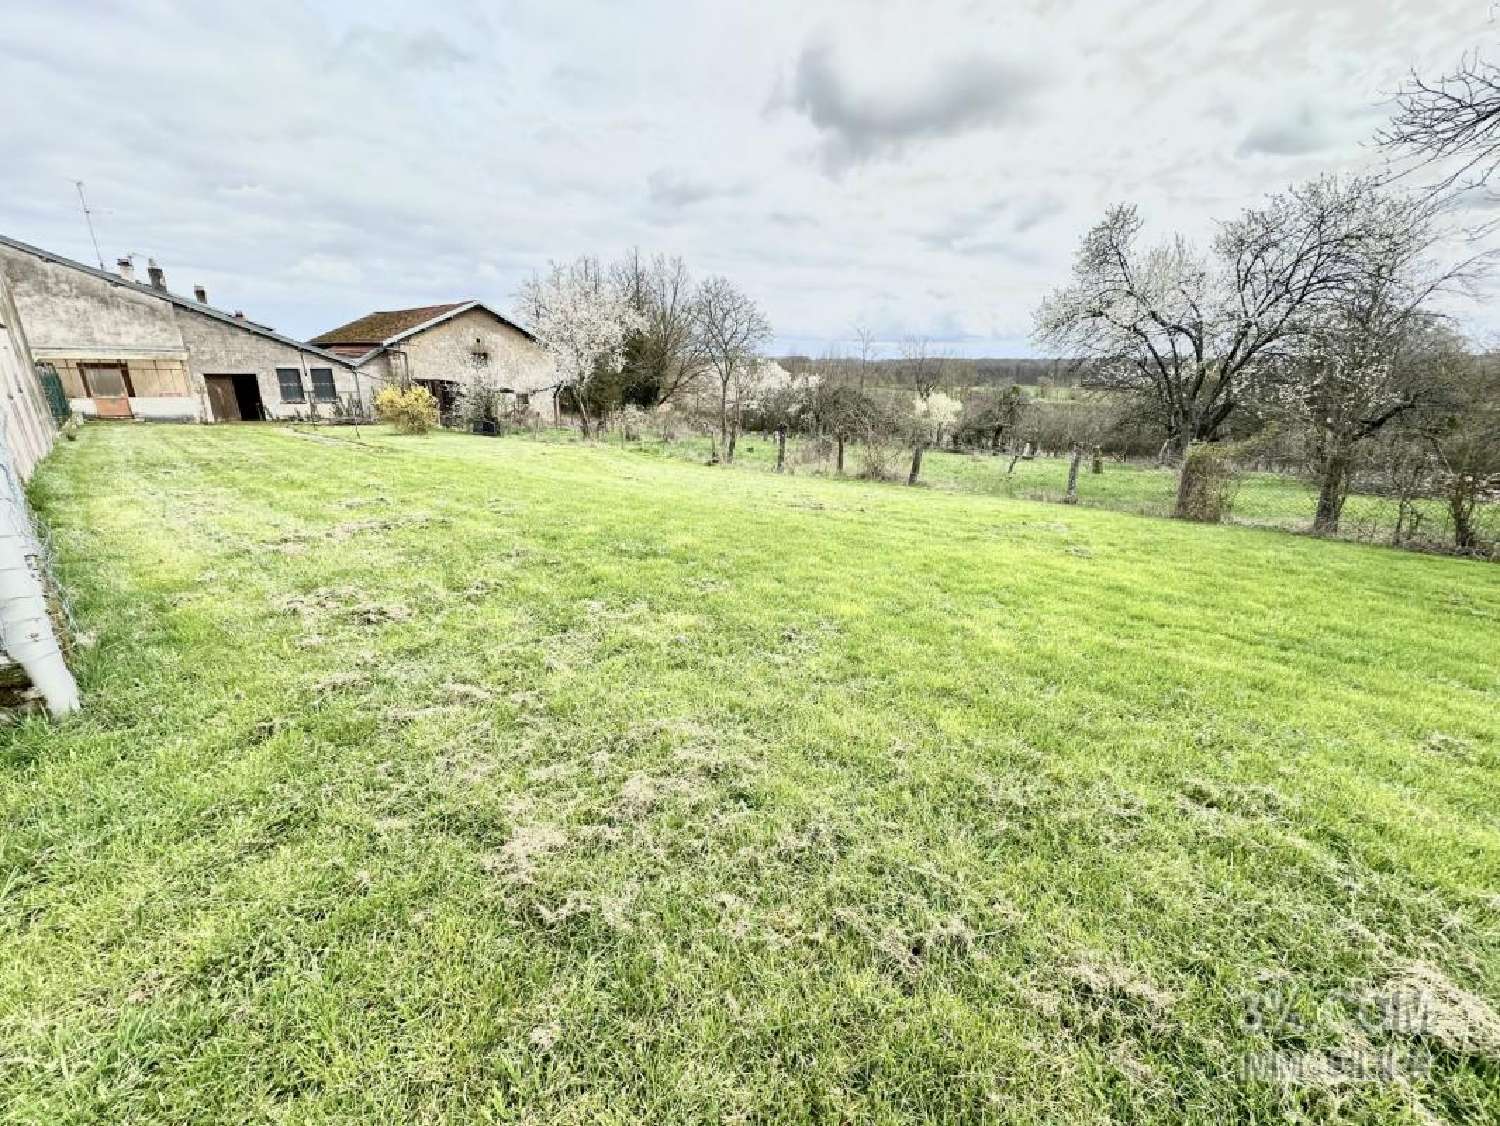  for sale village house Xures Meurthe-et-Moselle 1